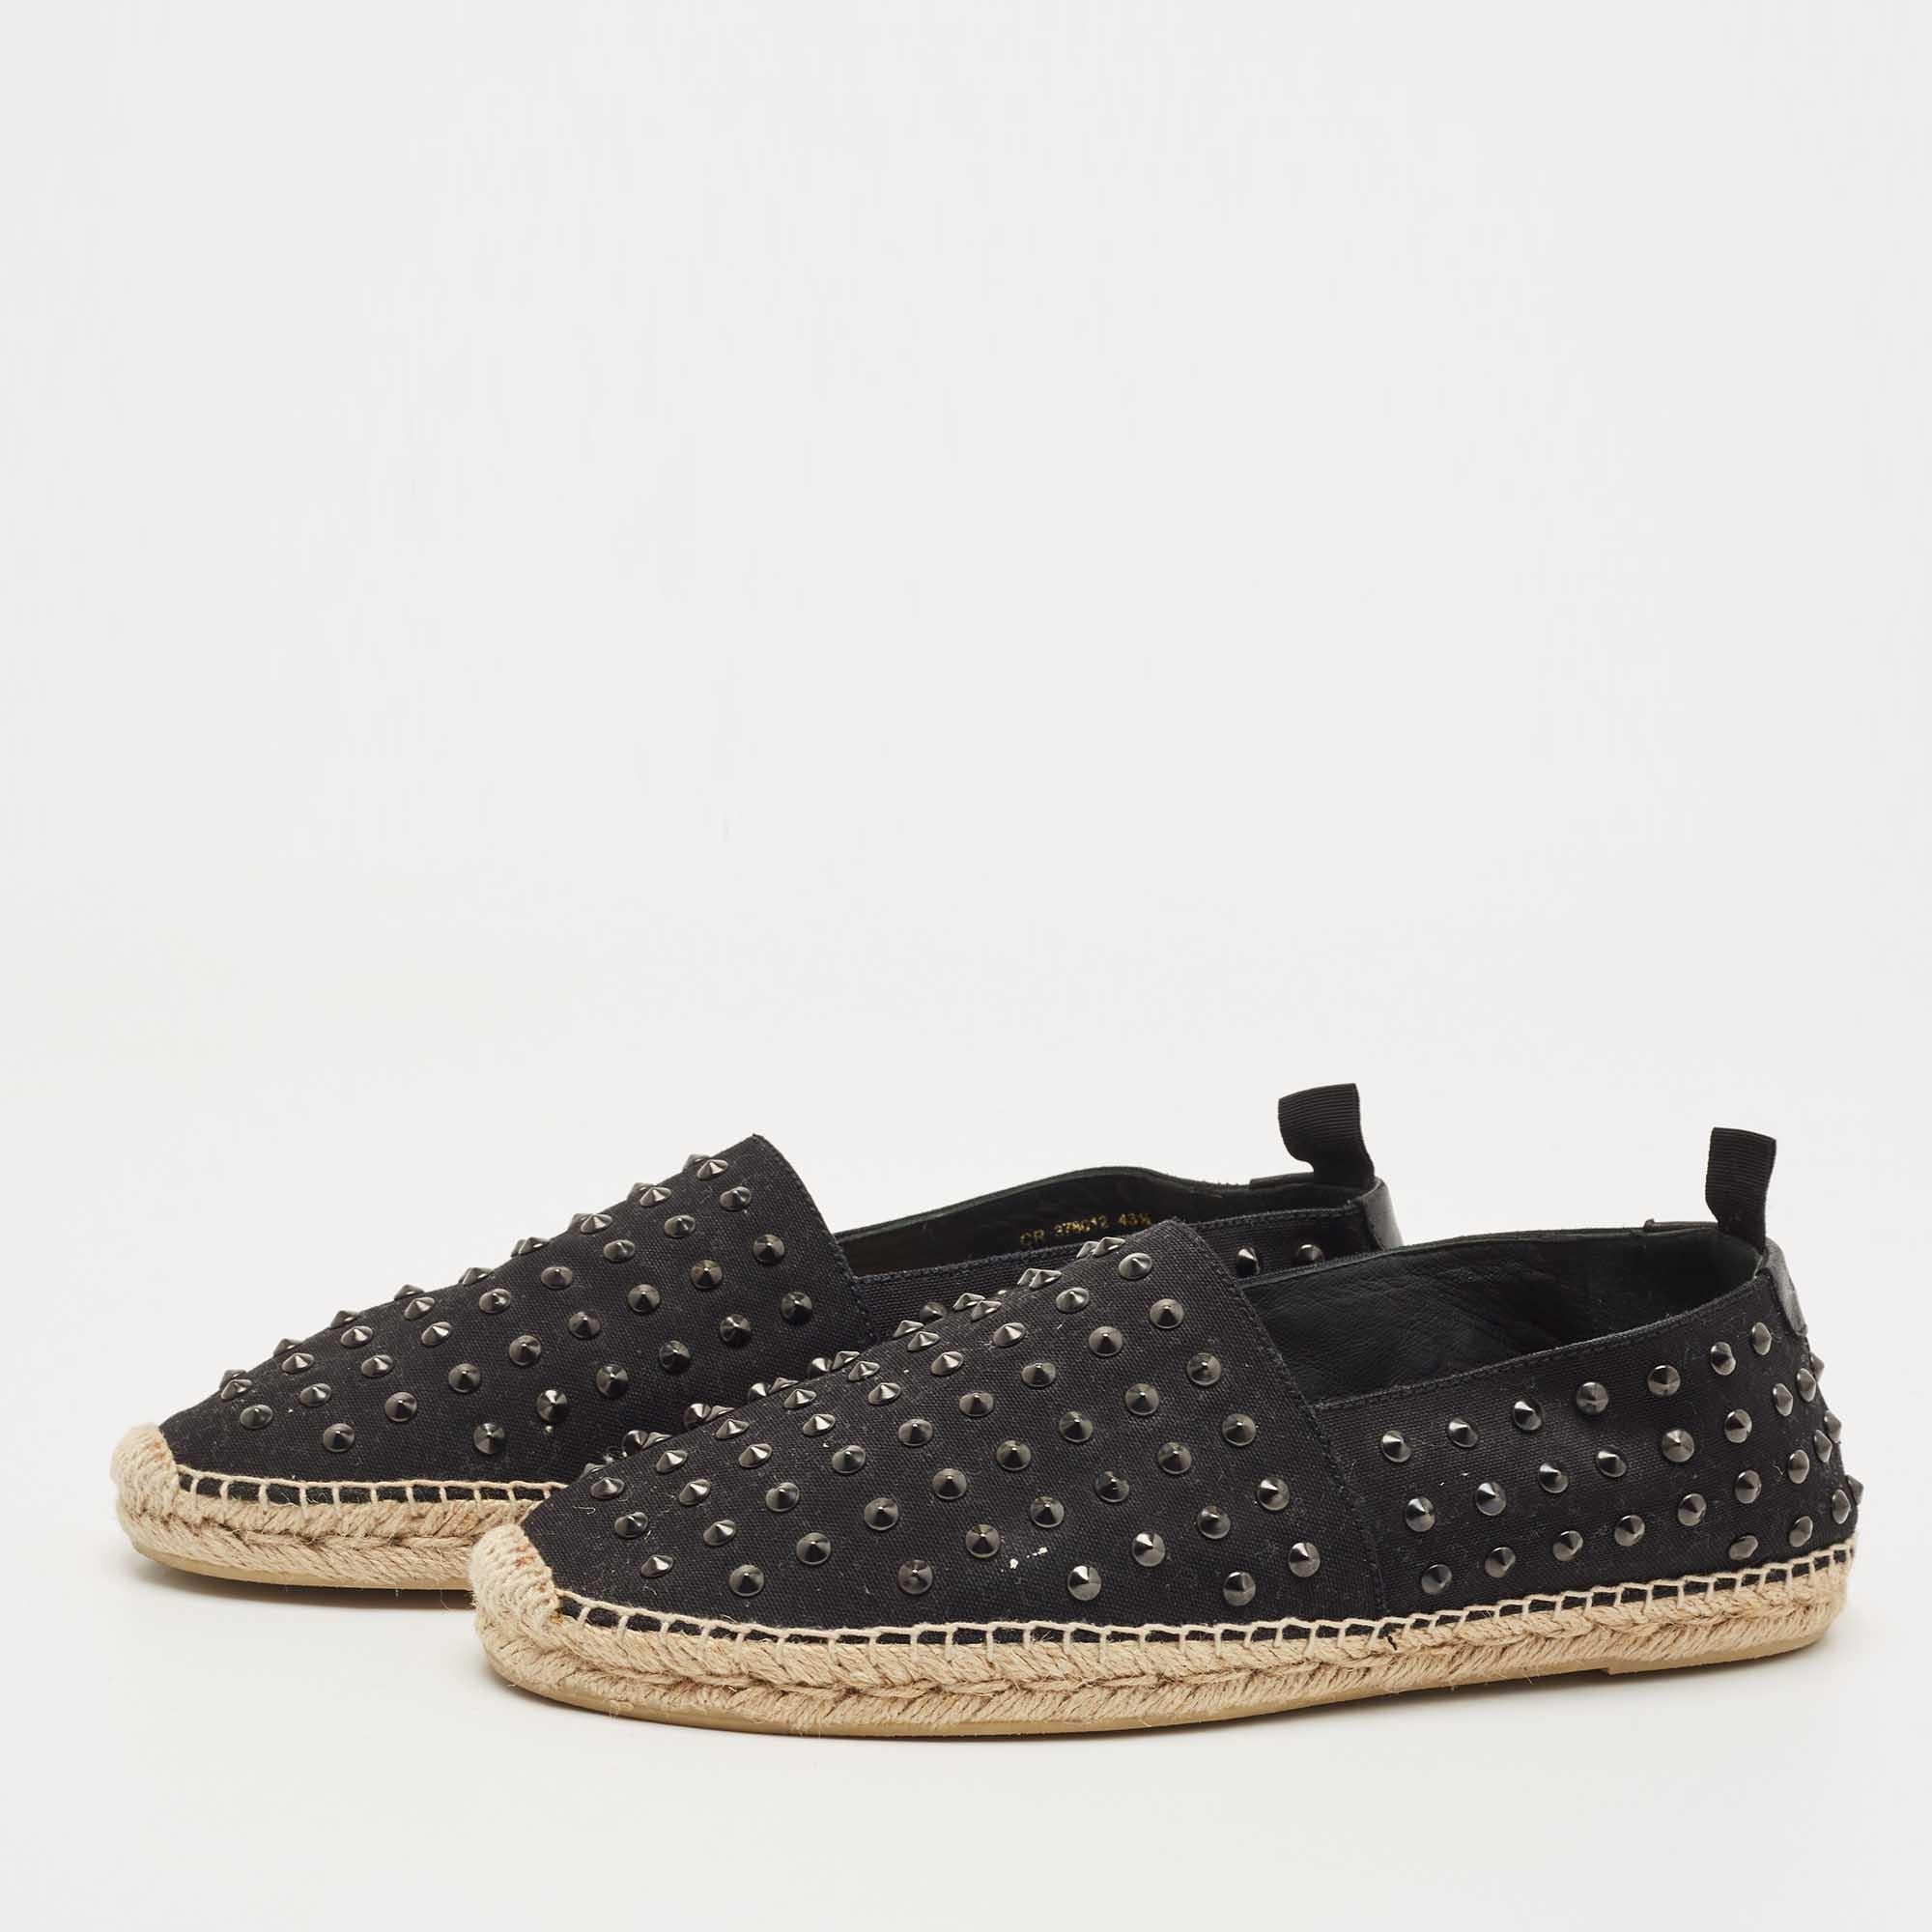 Step out in style every day with these gorgeous espadrilles from Saint Laurent Paris. Featuring a canvas exterior, this round-toe pair has embellishments all over and knitted details on the toes. Slip these on with shorts and dresses.

